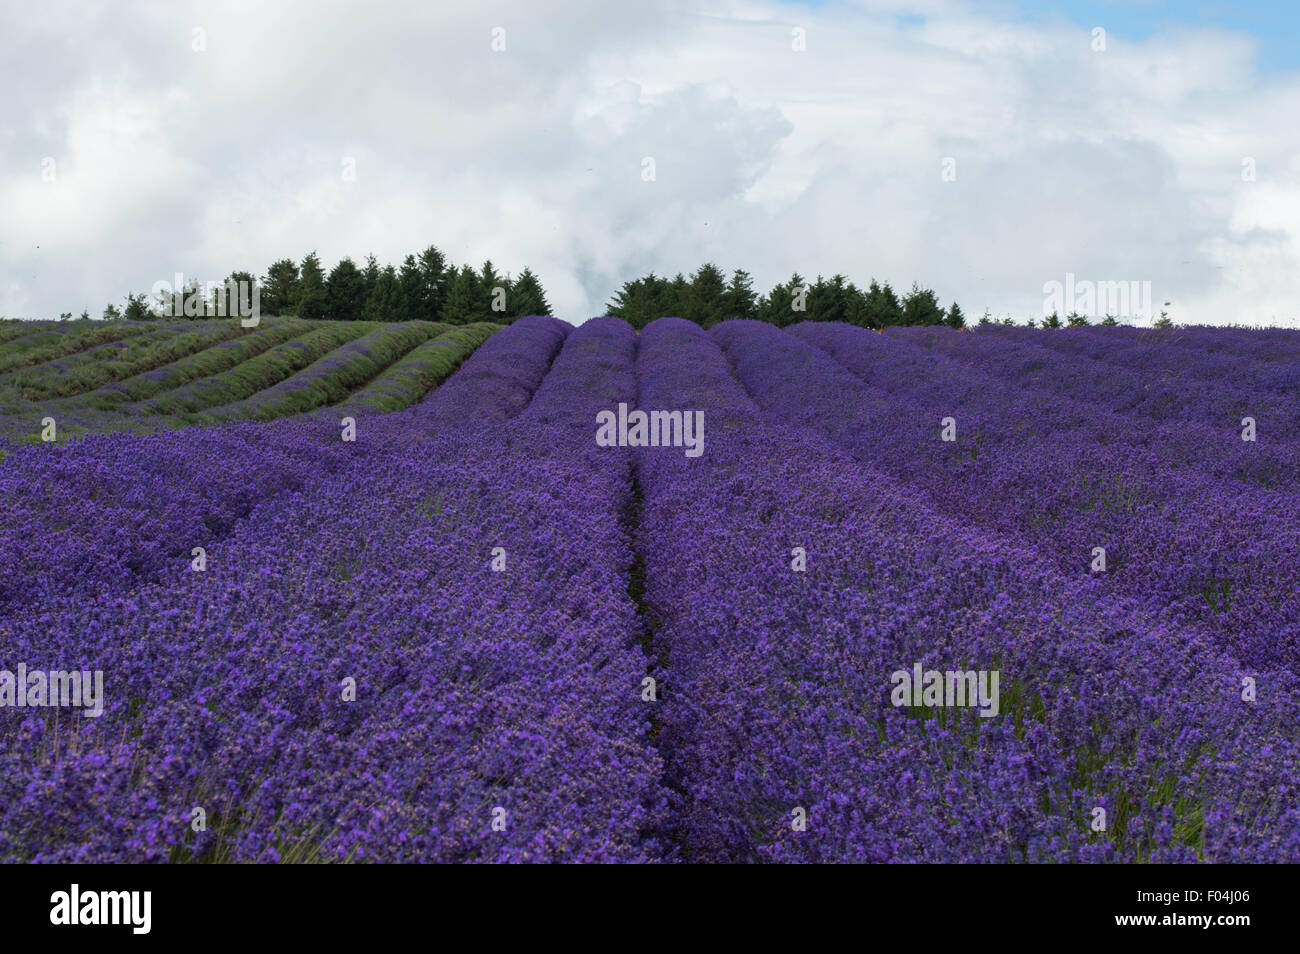 Rows of Lavender Stock Photo